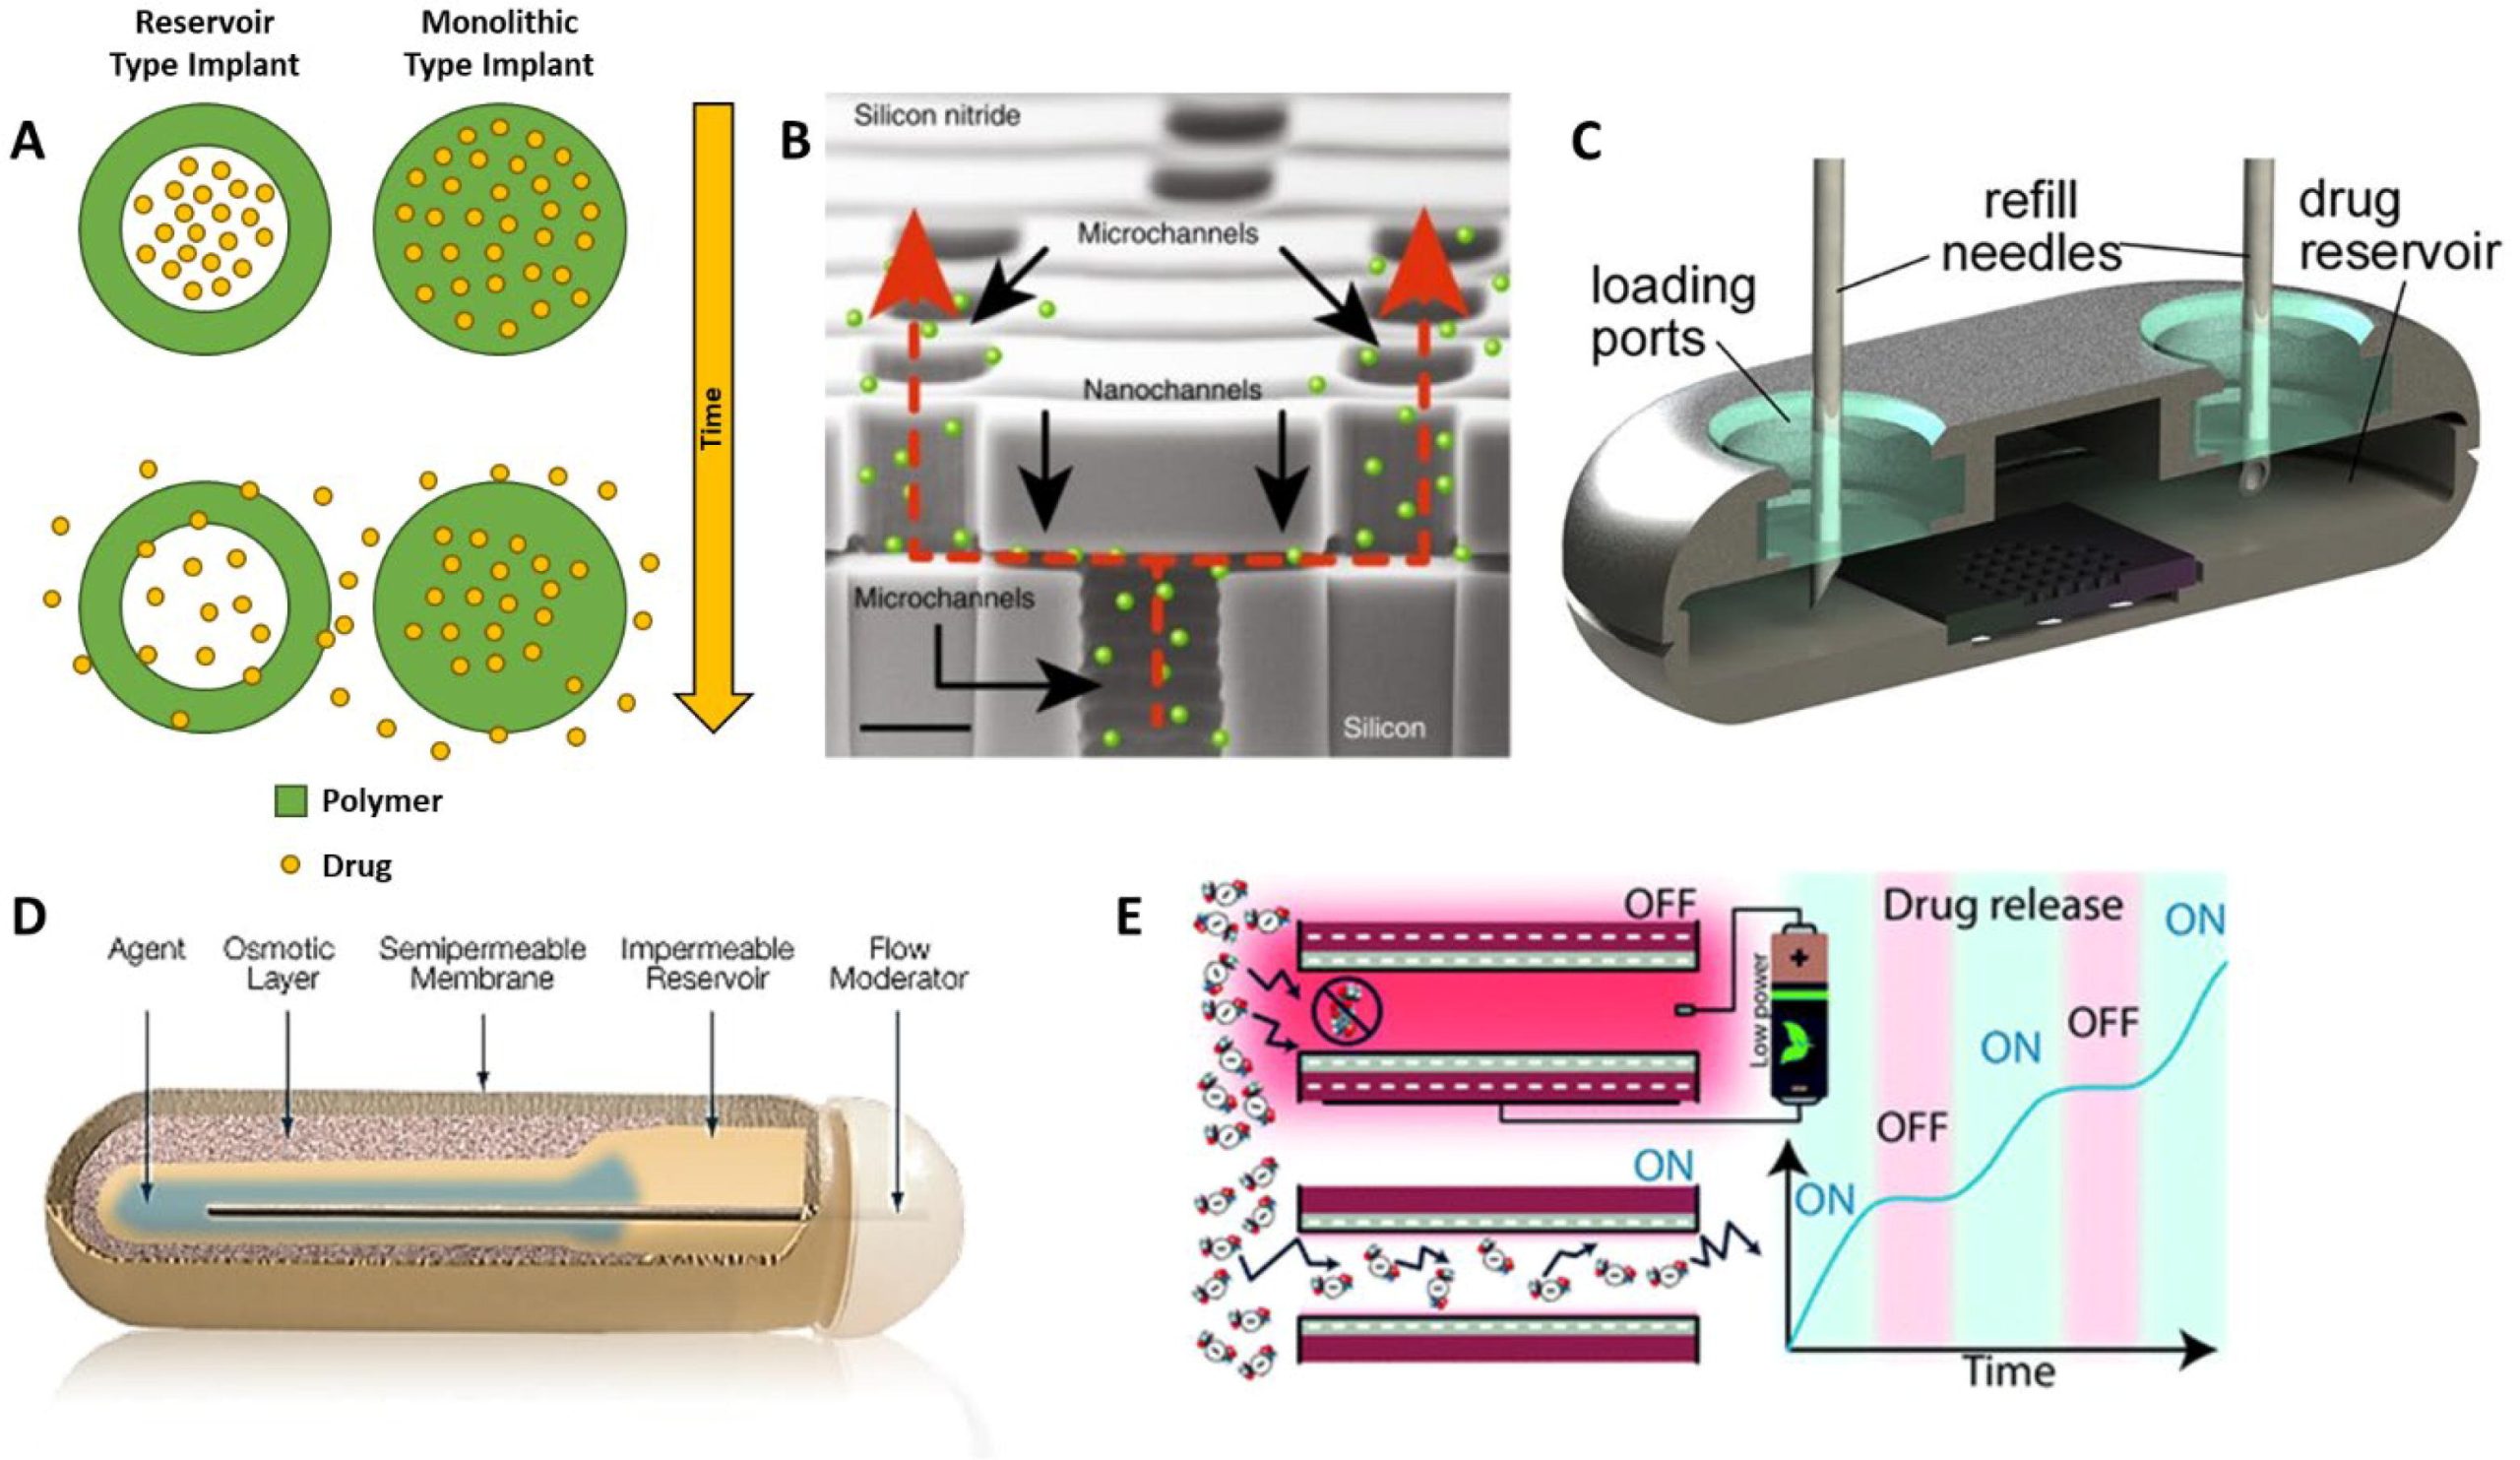 Solid implantable devices for sustained drug delivery